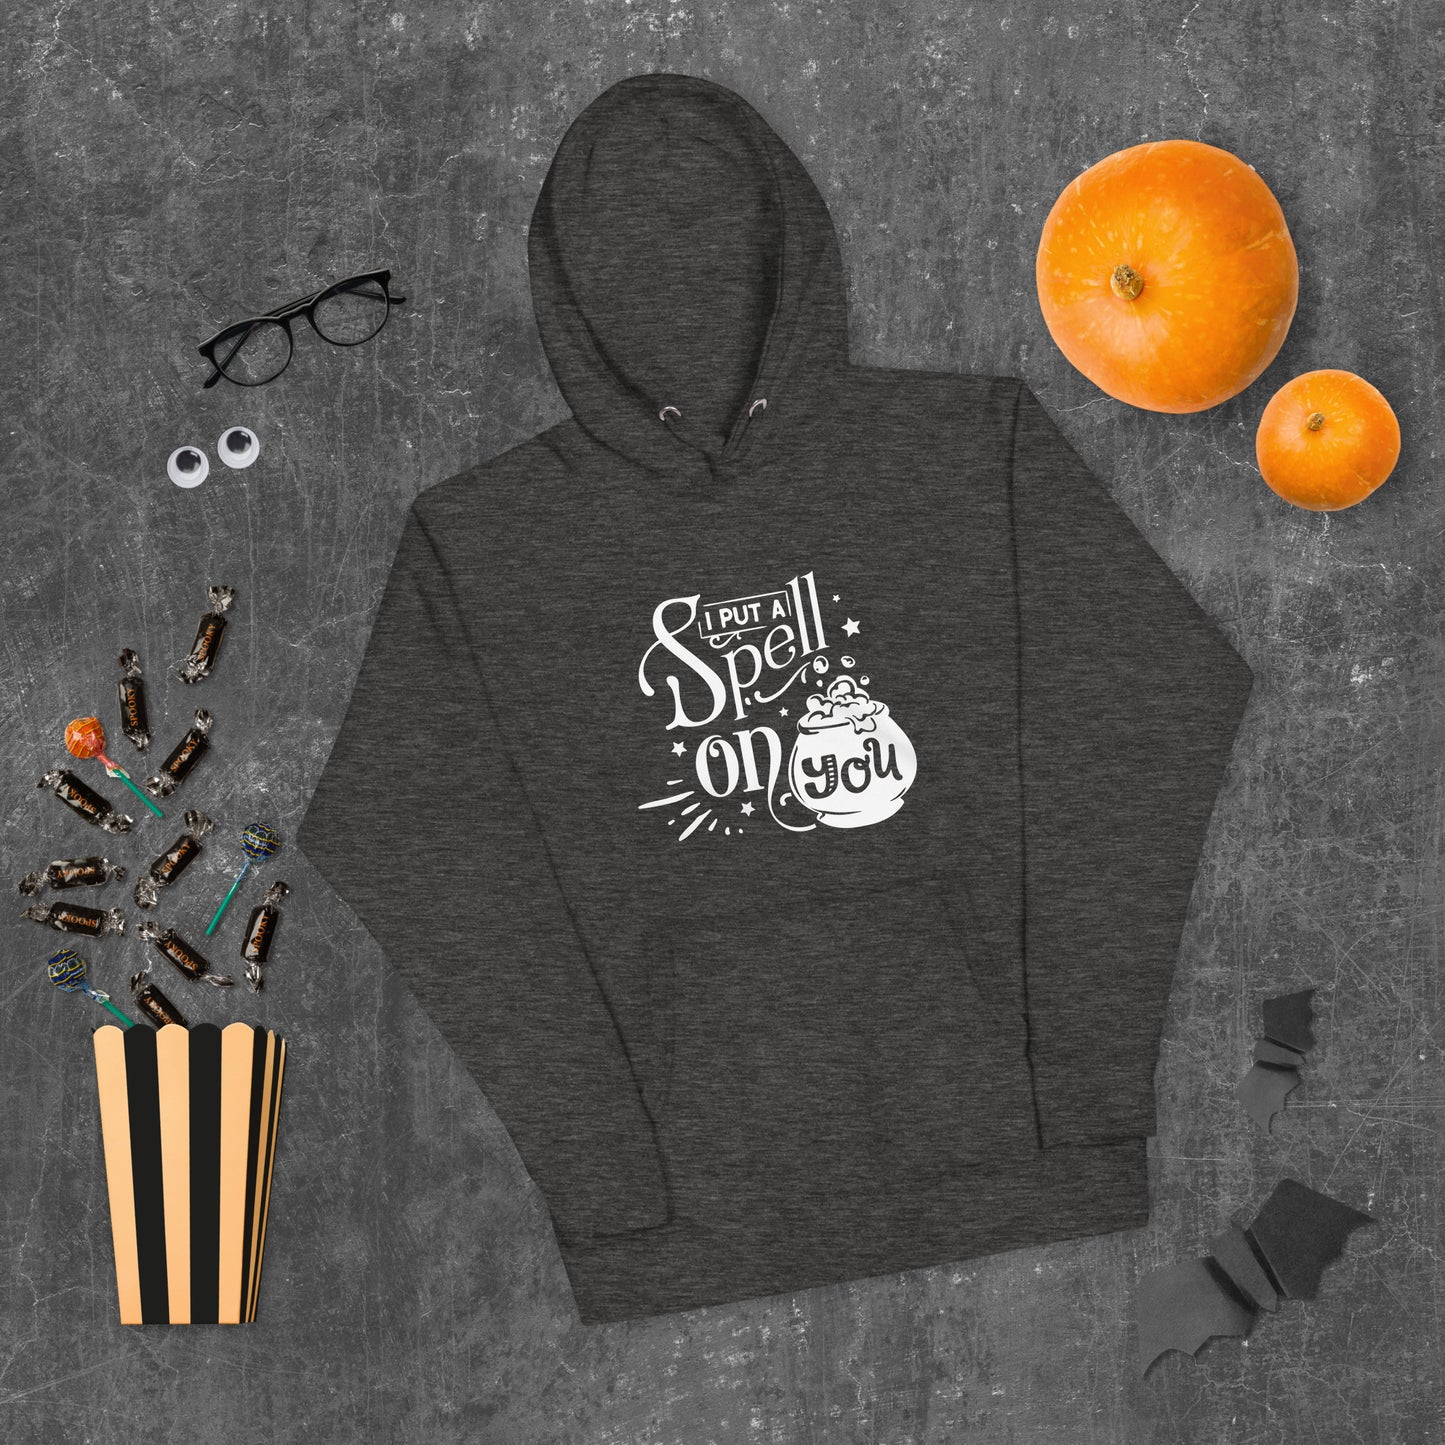 I Put A Spell On You Unisex Hoodie.